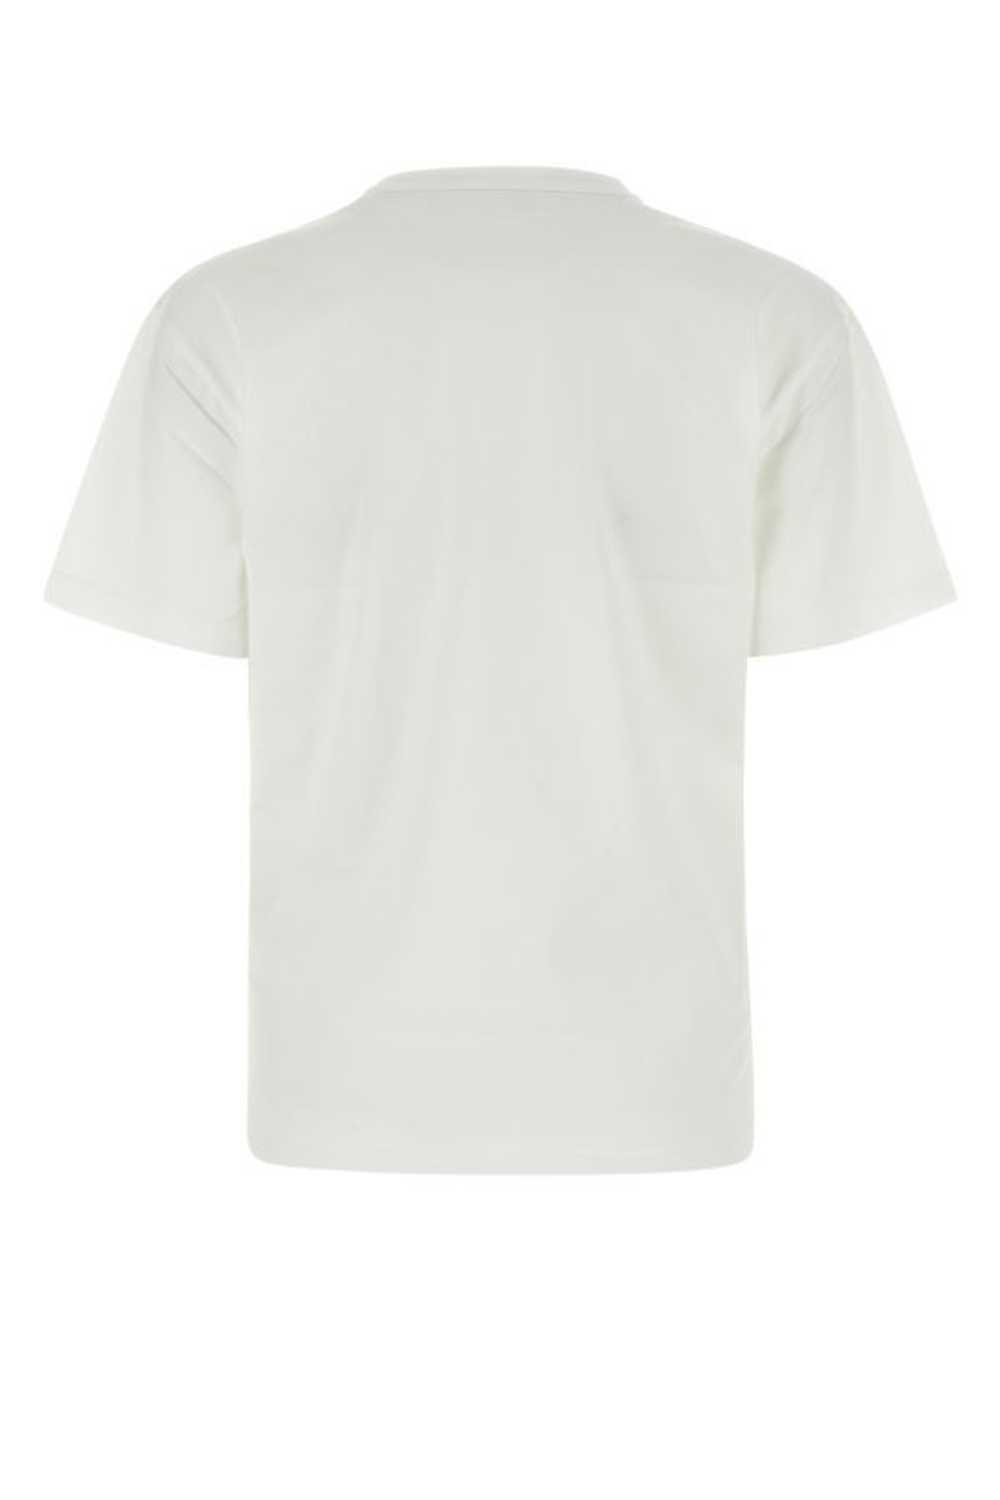 T by Alexander Wang White Cotton T-Shirt - image 4